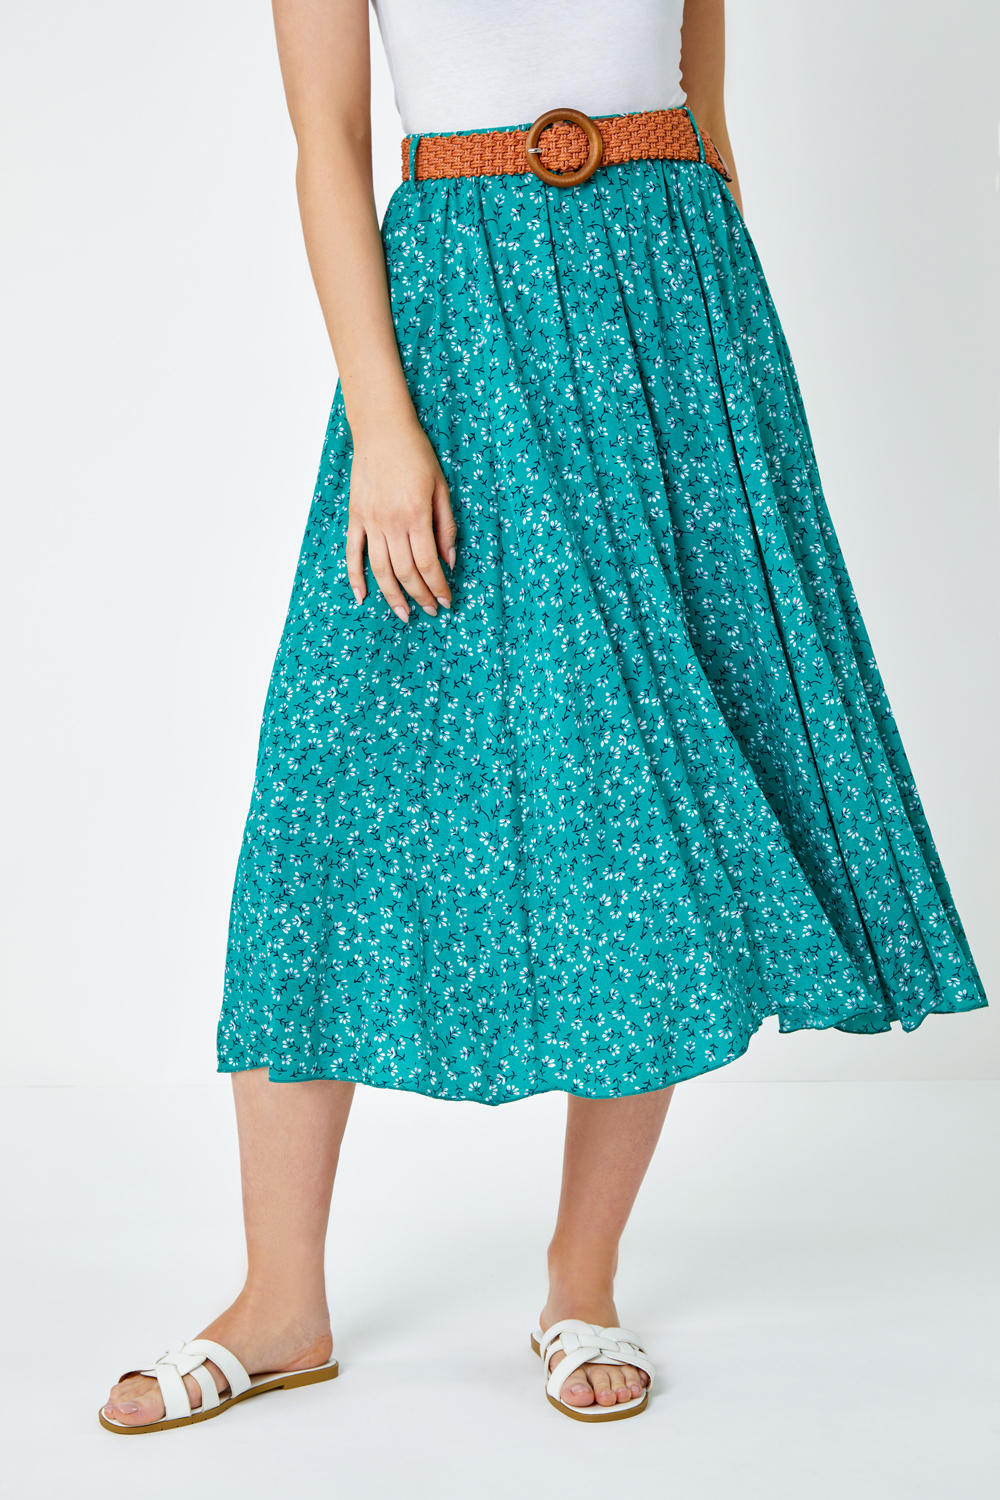 Green Ditsy Floral Print Belted Midi Skirt, Image 5 of 5